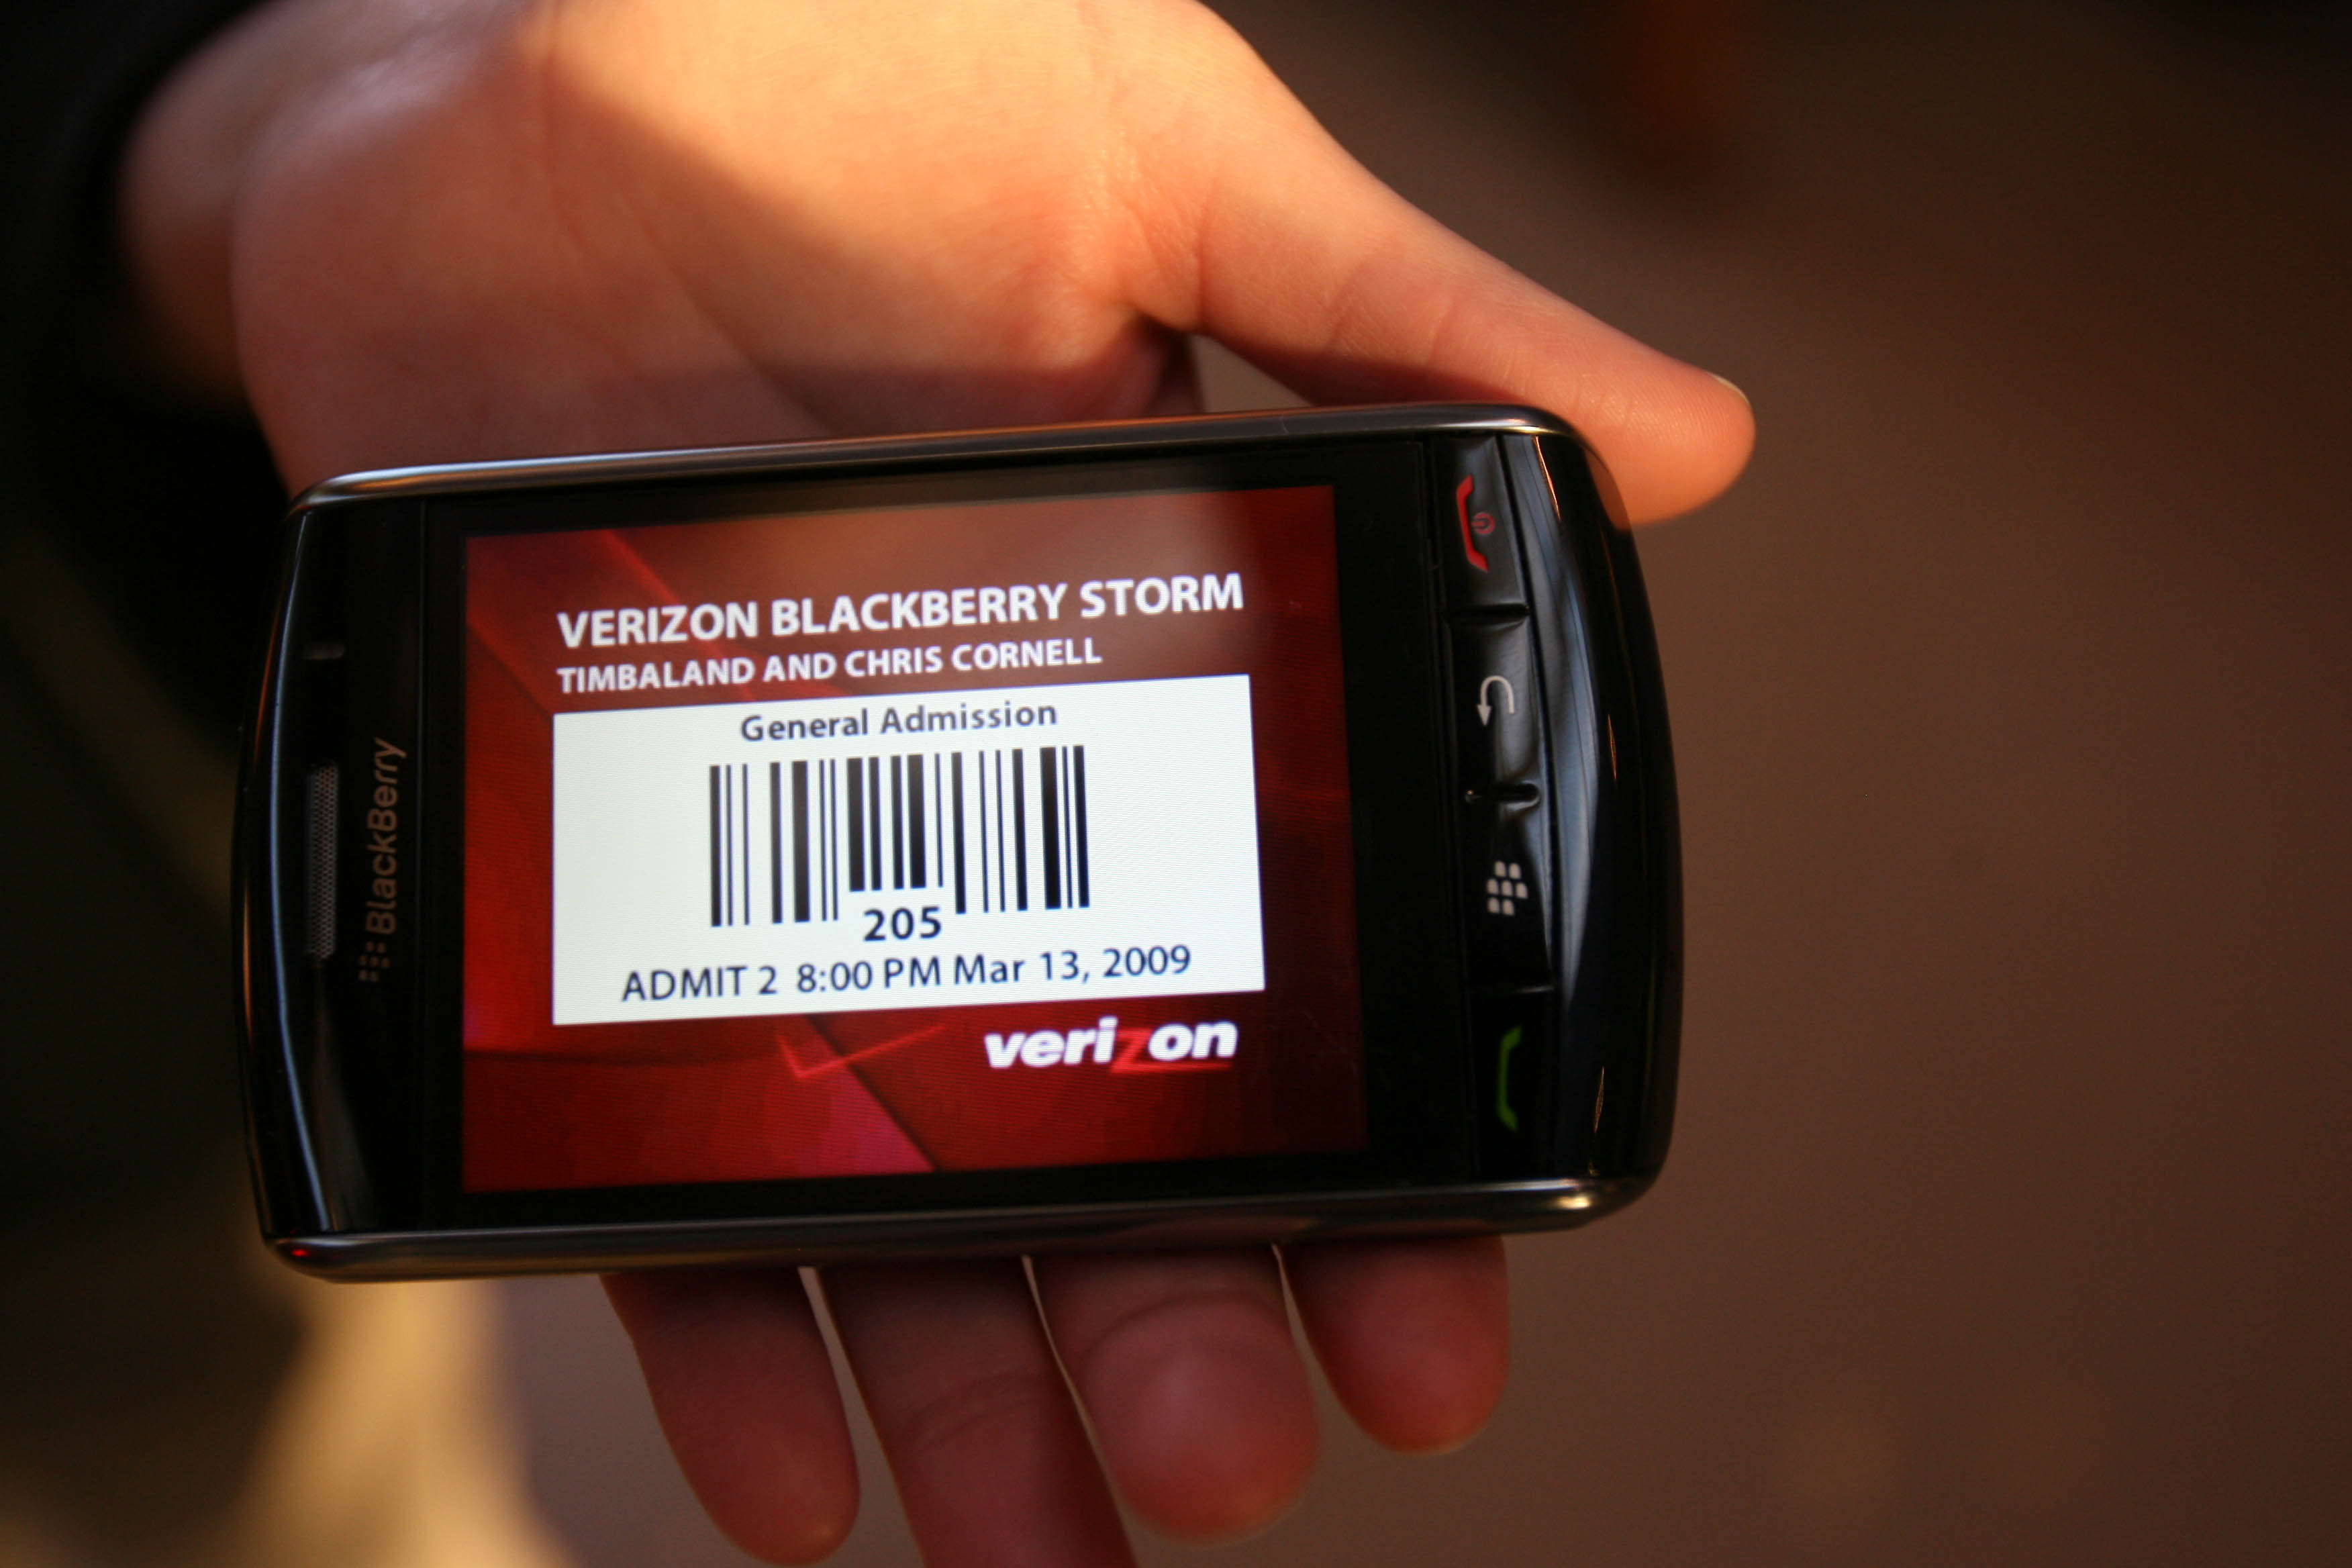 A Verizon Blackberry Storm mobile ticket appears on a a mobile device at a Verizon Wireless and Blackberry Storm event on March 13, 2009 in Chicago, Illinois. (Tasos Katopodis&mdash;2009 Getty Images)